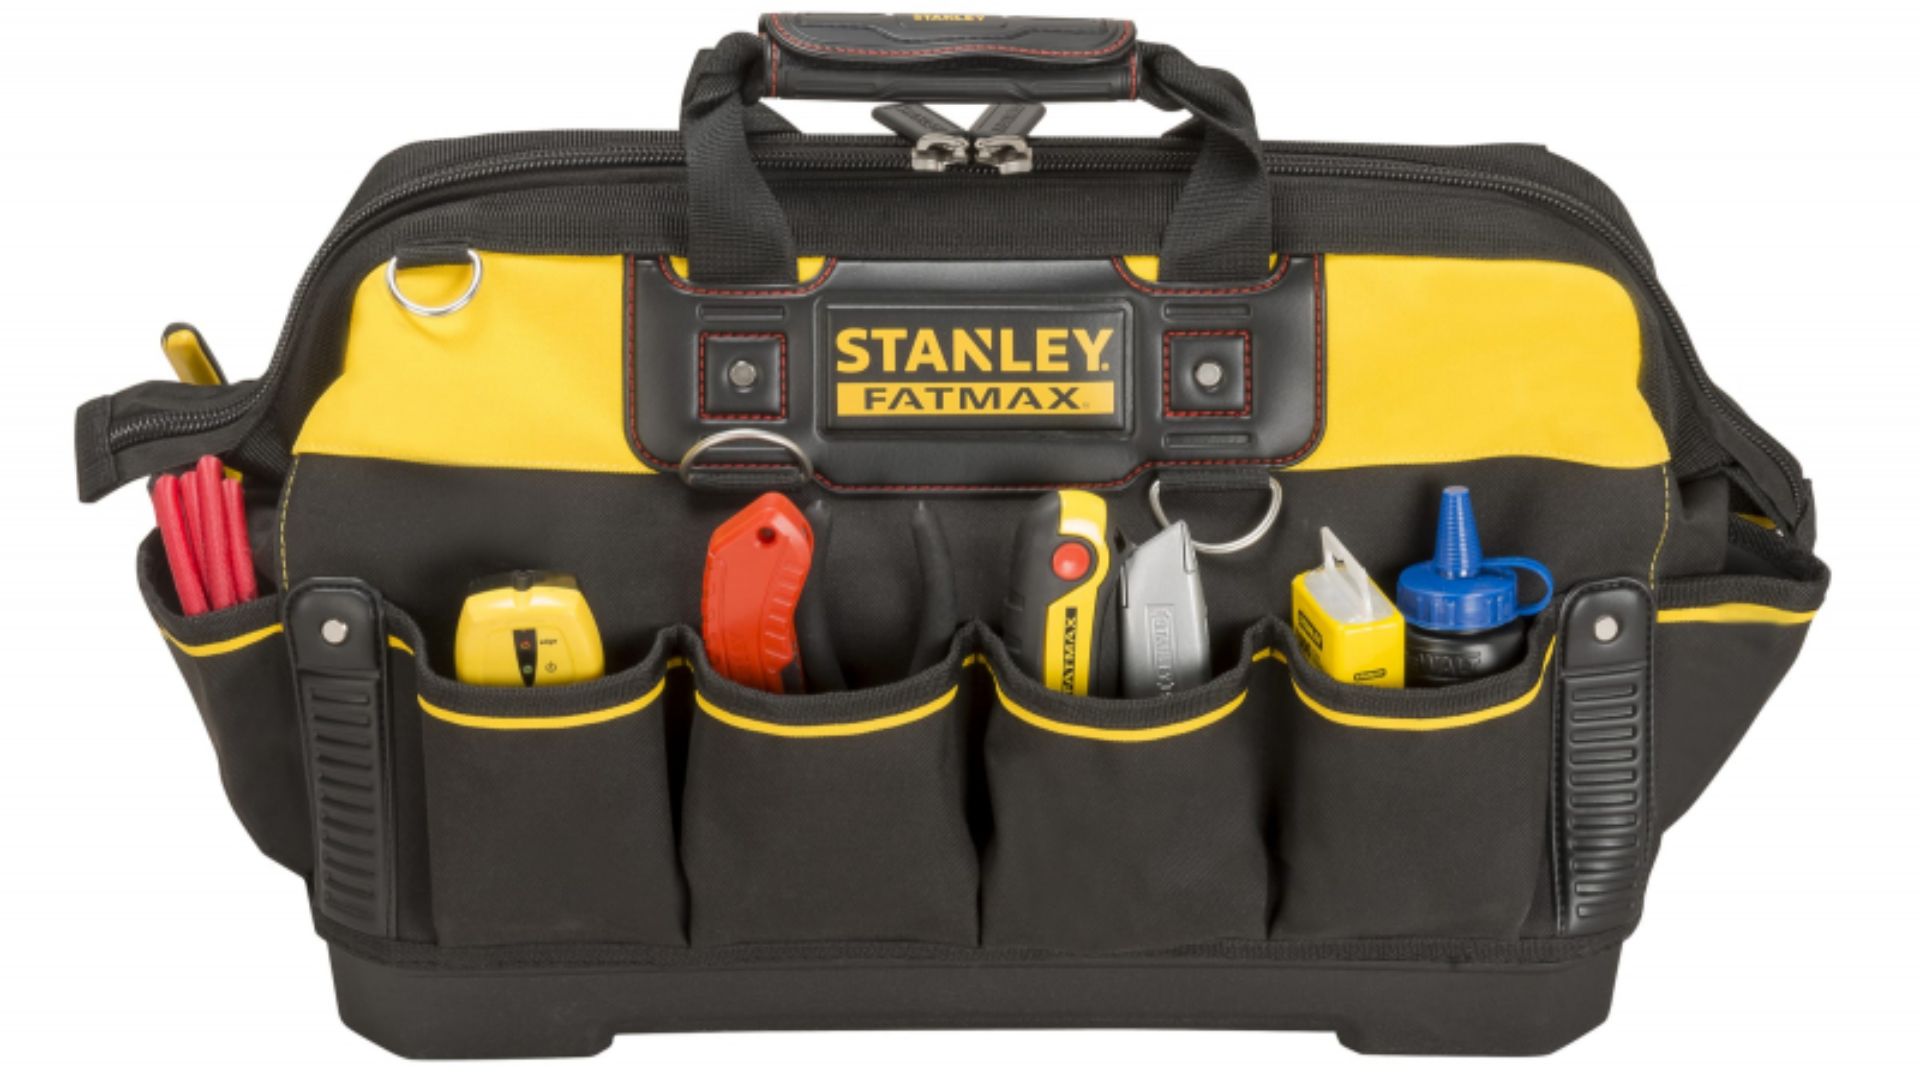 Stanley Tools Suppliers in UAE Cater to Diverse Needs